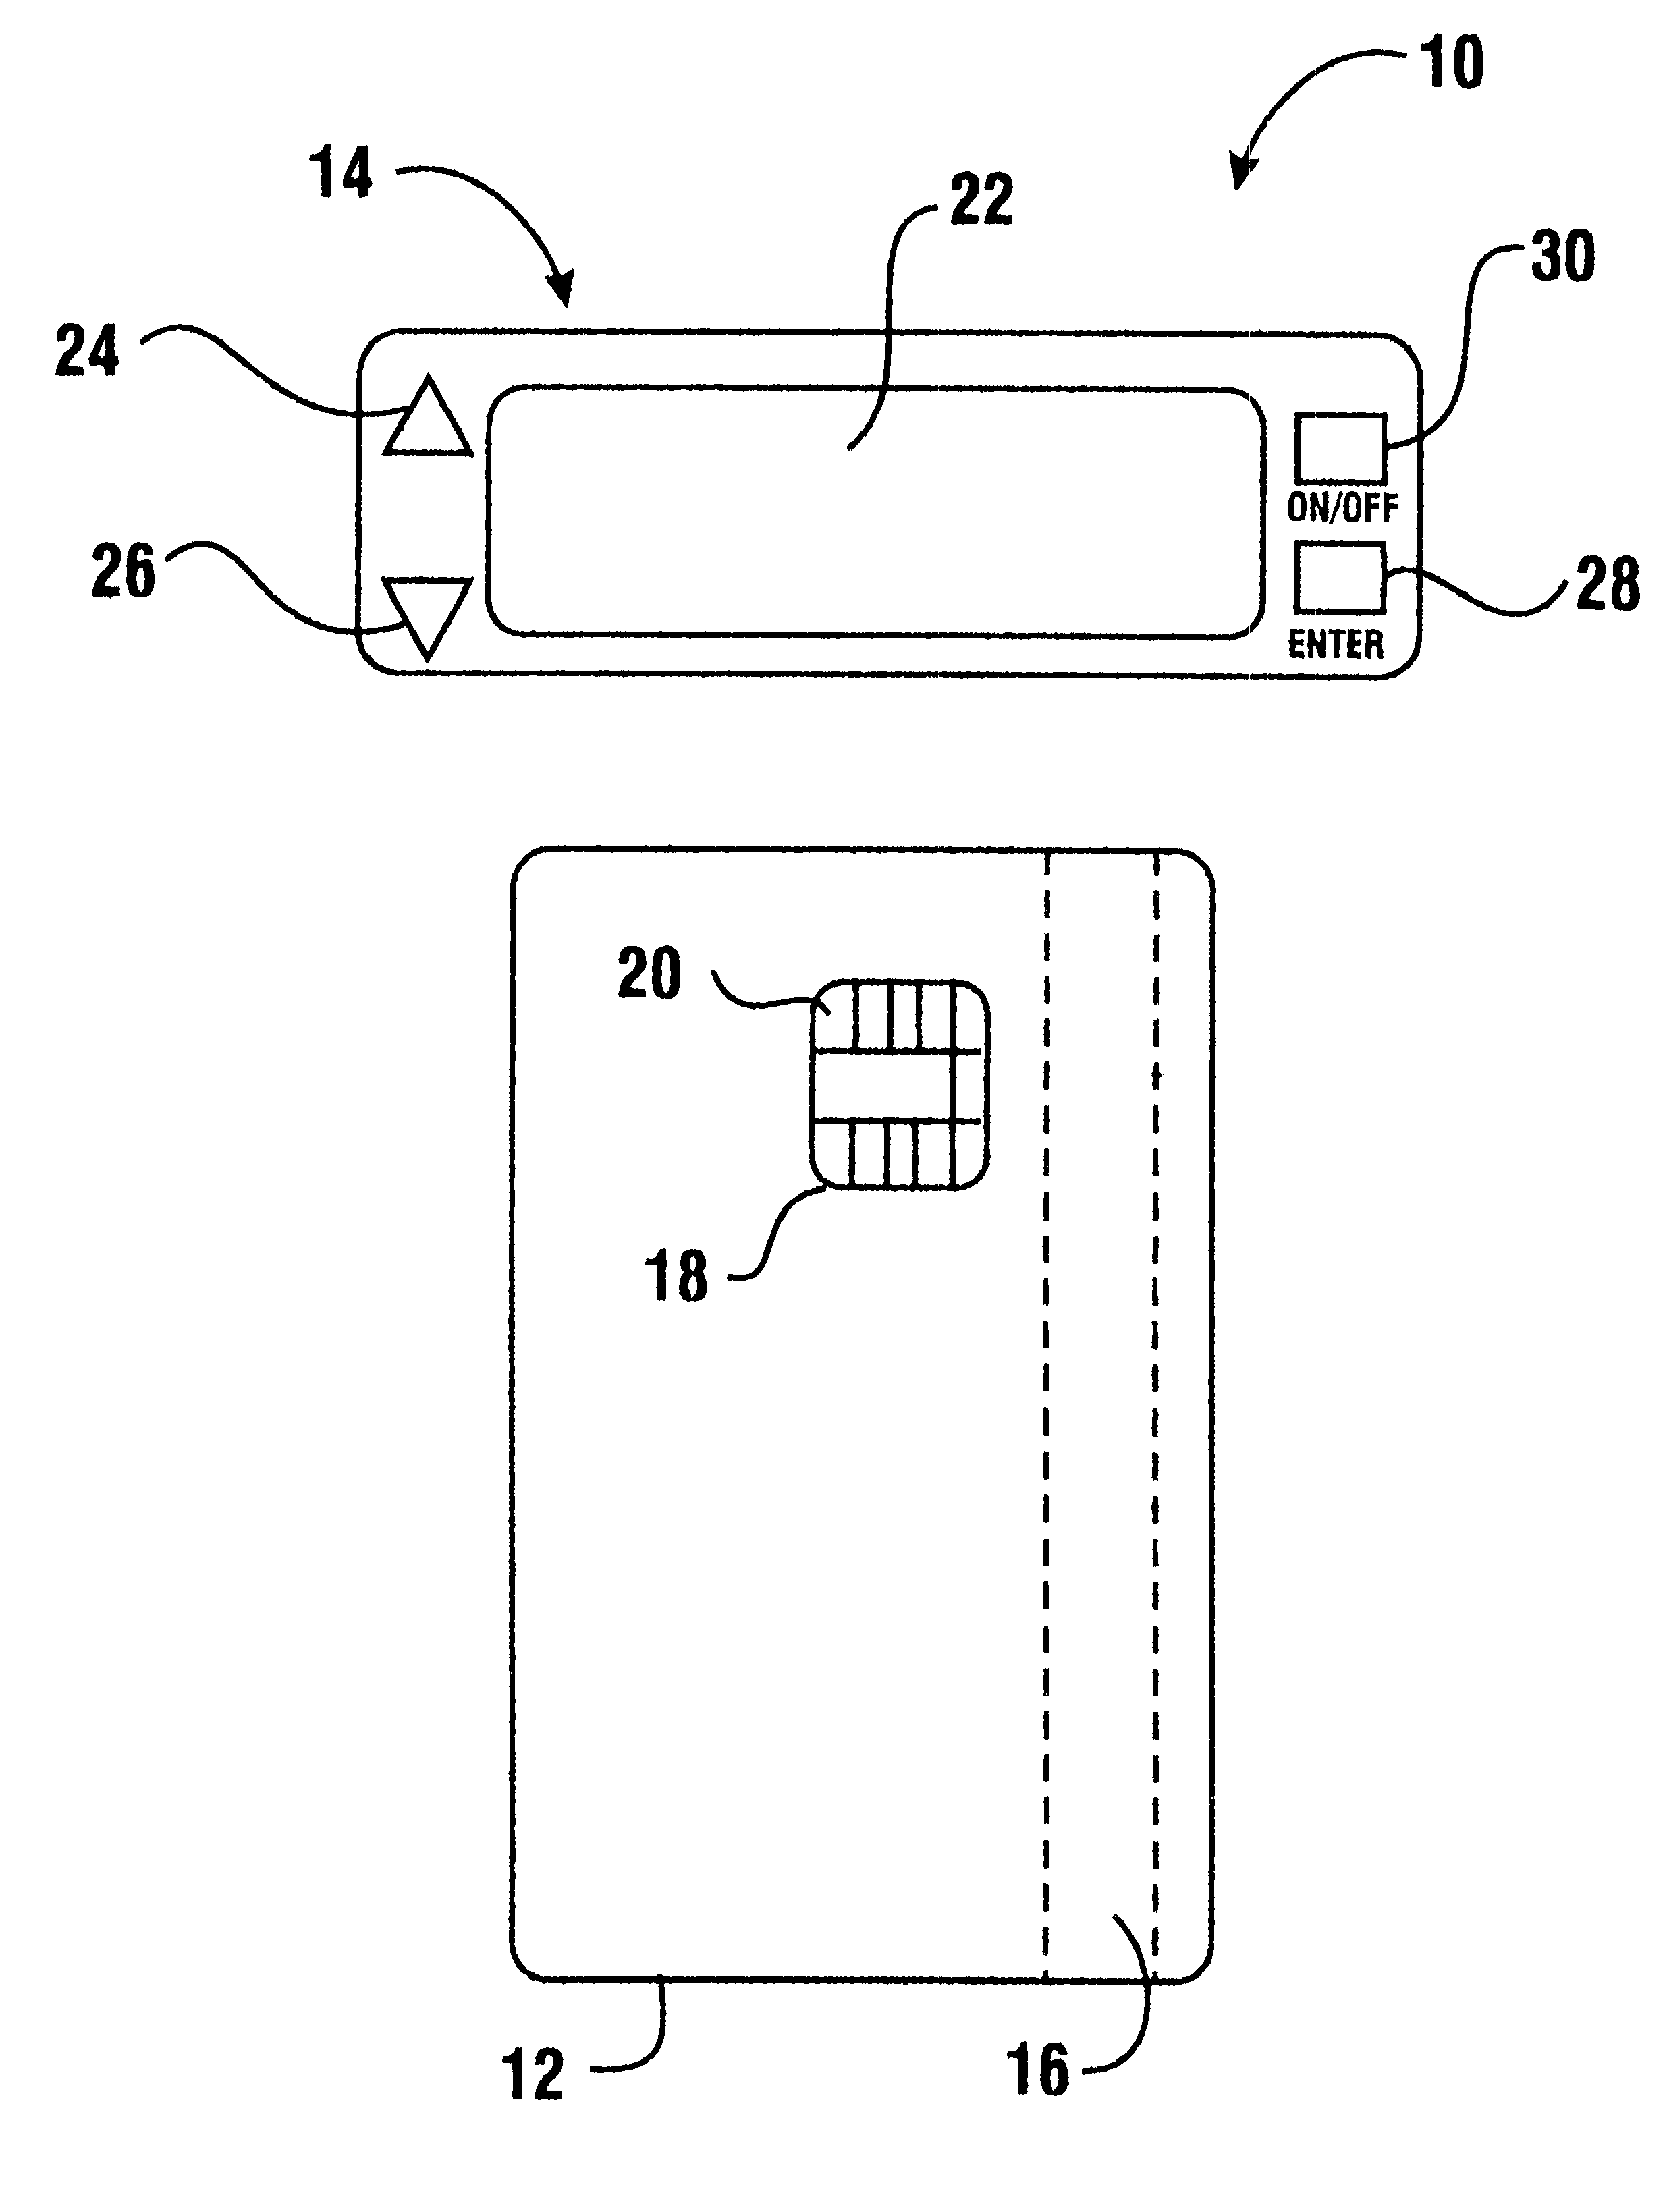 Portable automated banking apparatus and system